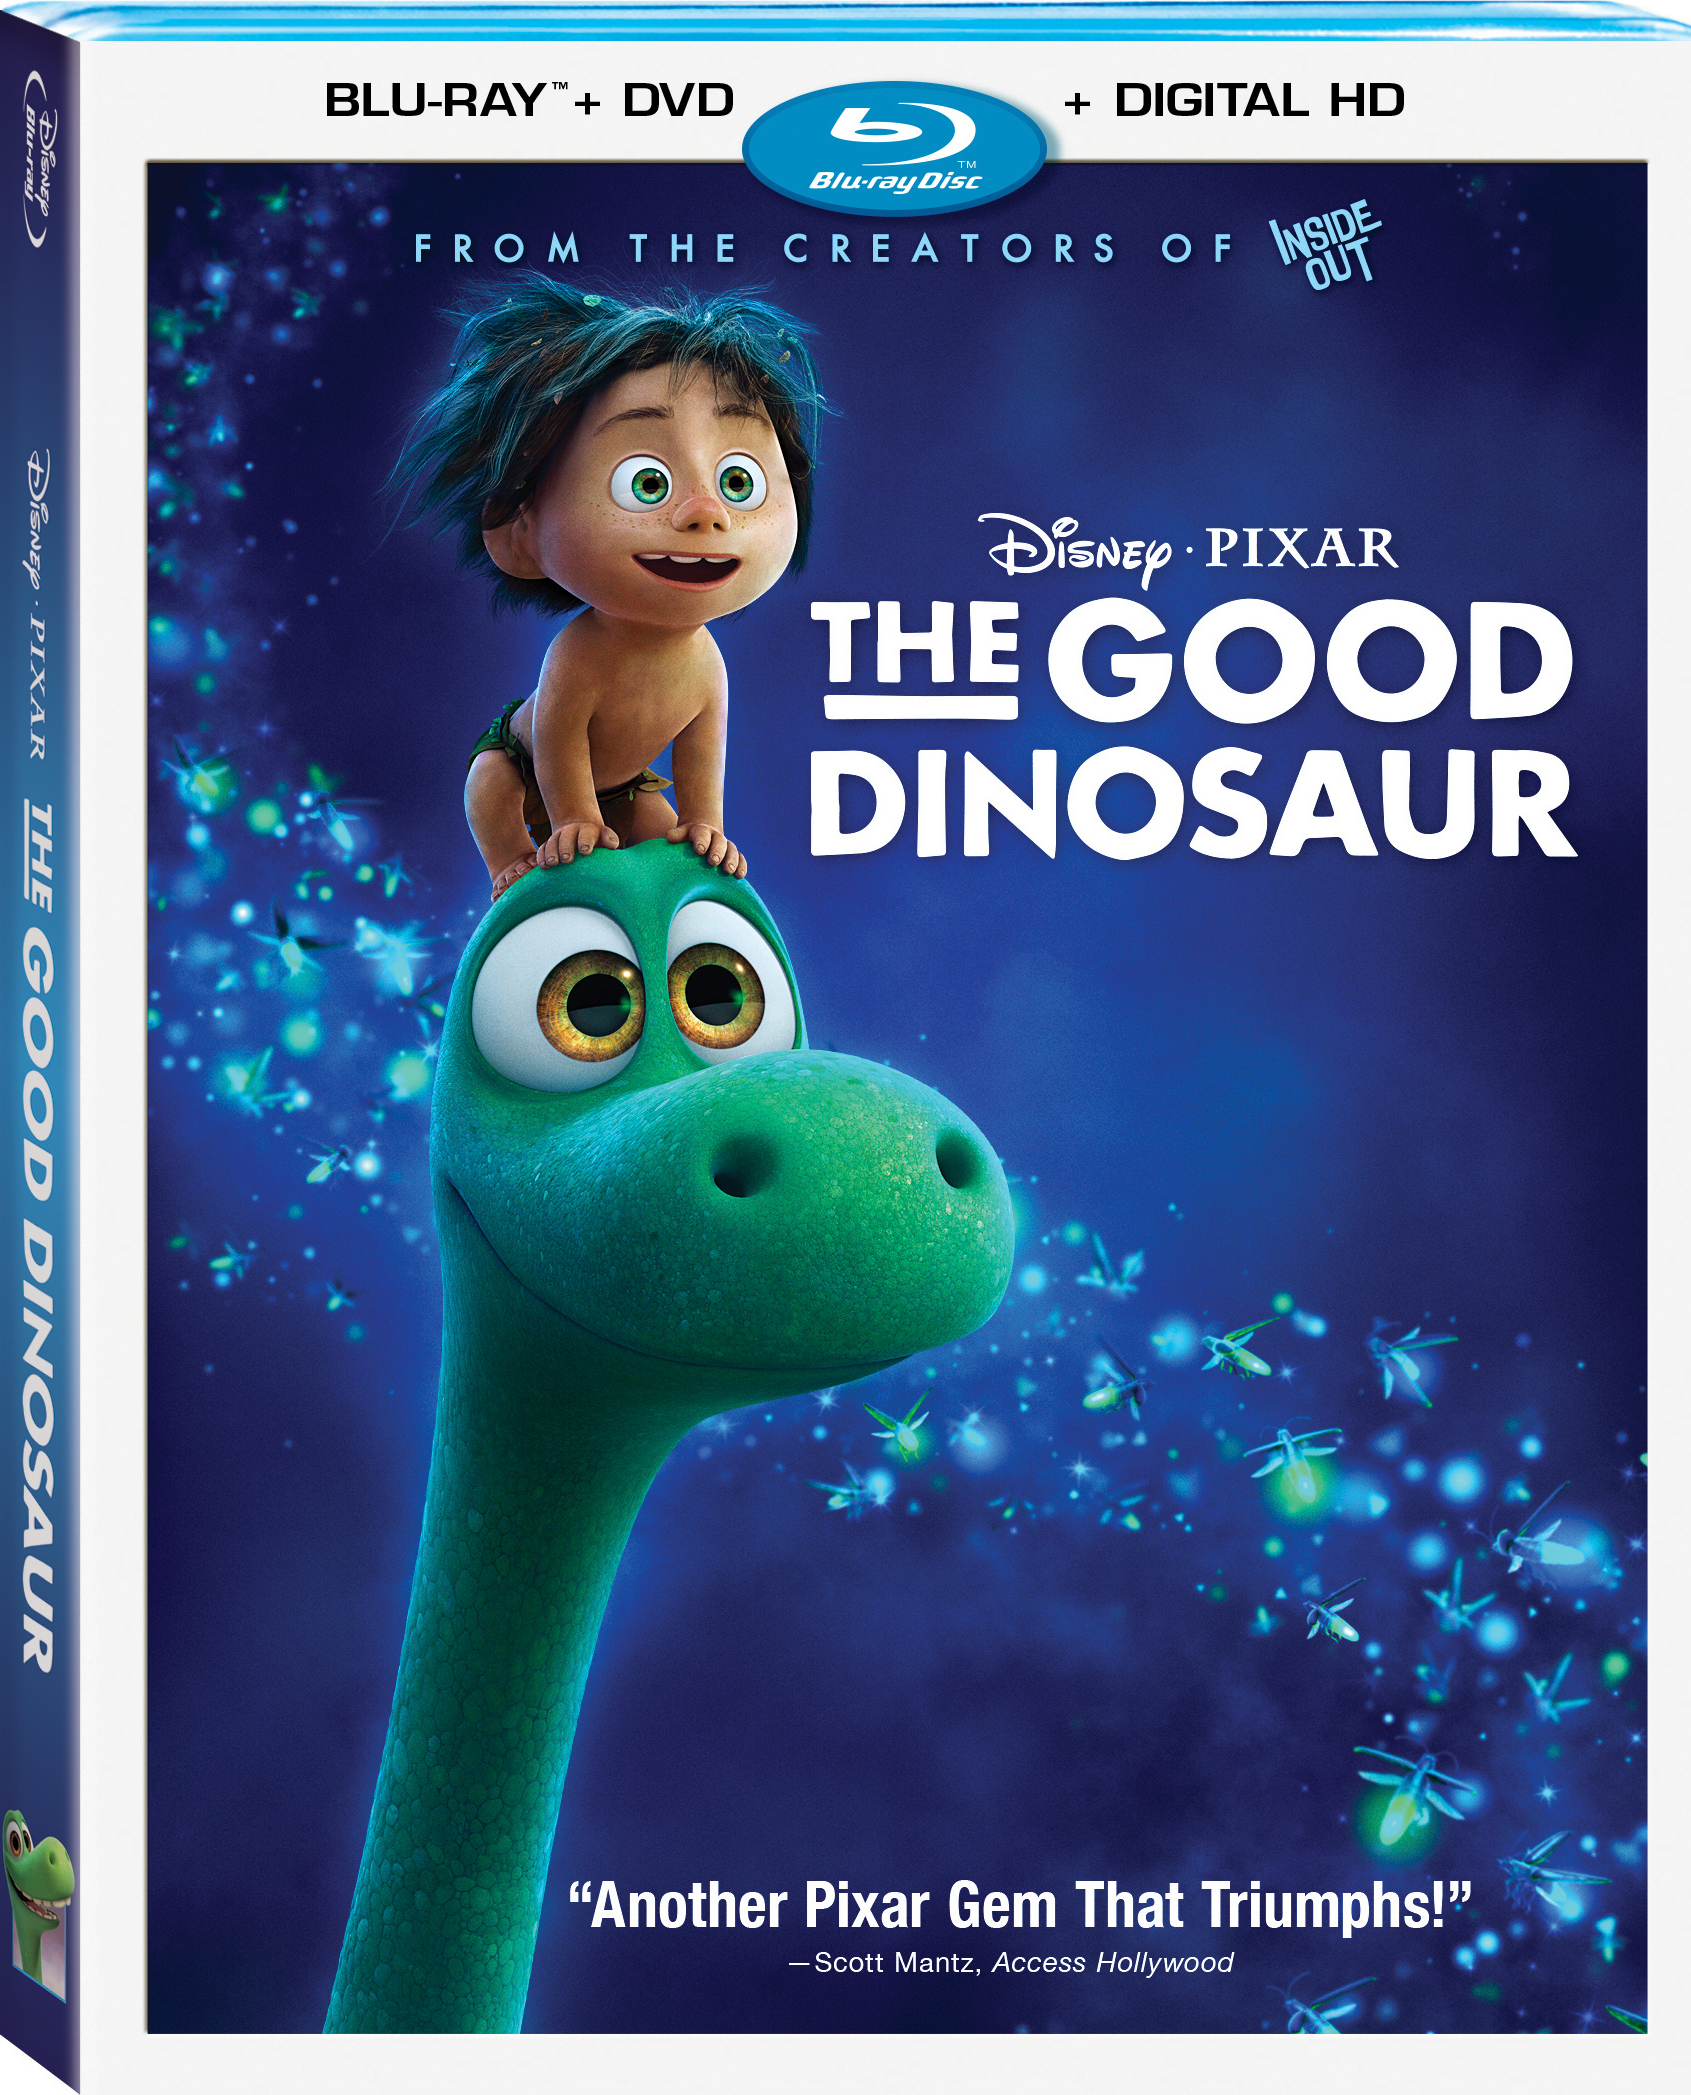 https://www.laughingplace.com/w/wp-content/uploads/2016/02/The-good-dinosaur.jpg